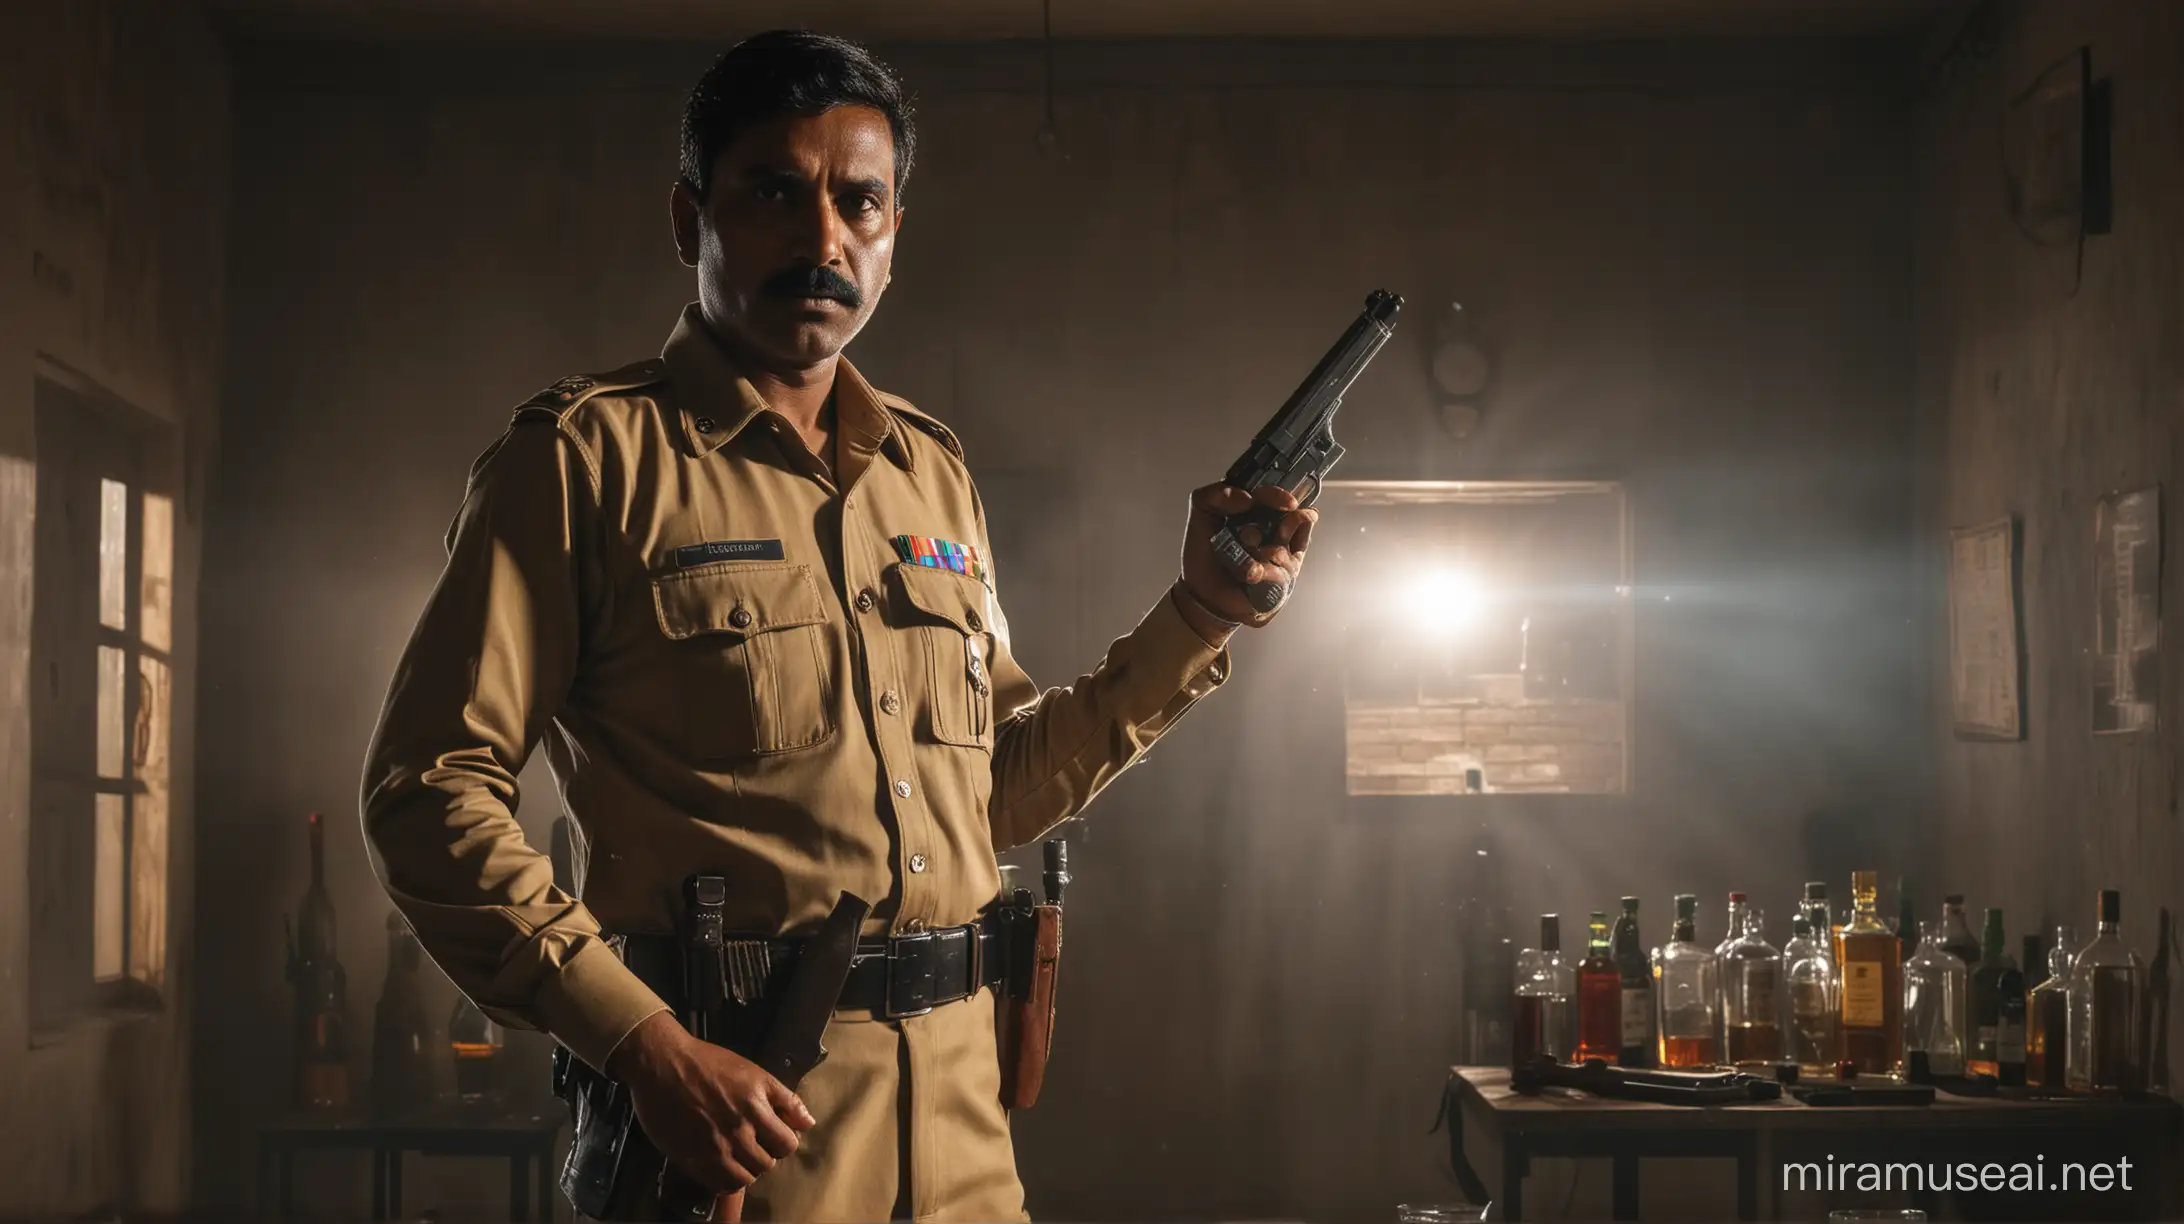 Indian Police Officer in Action Khakee Uniform Guns Ready Confronting Illegal Liquor in Dimly Lit Room